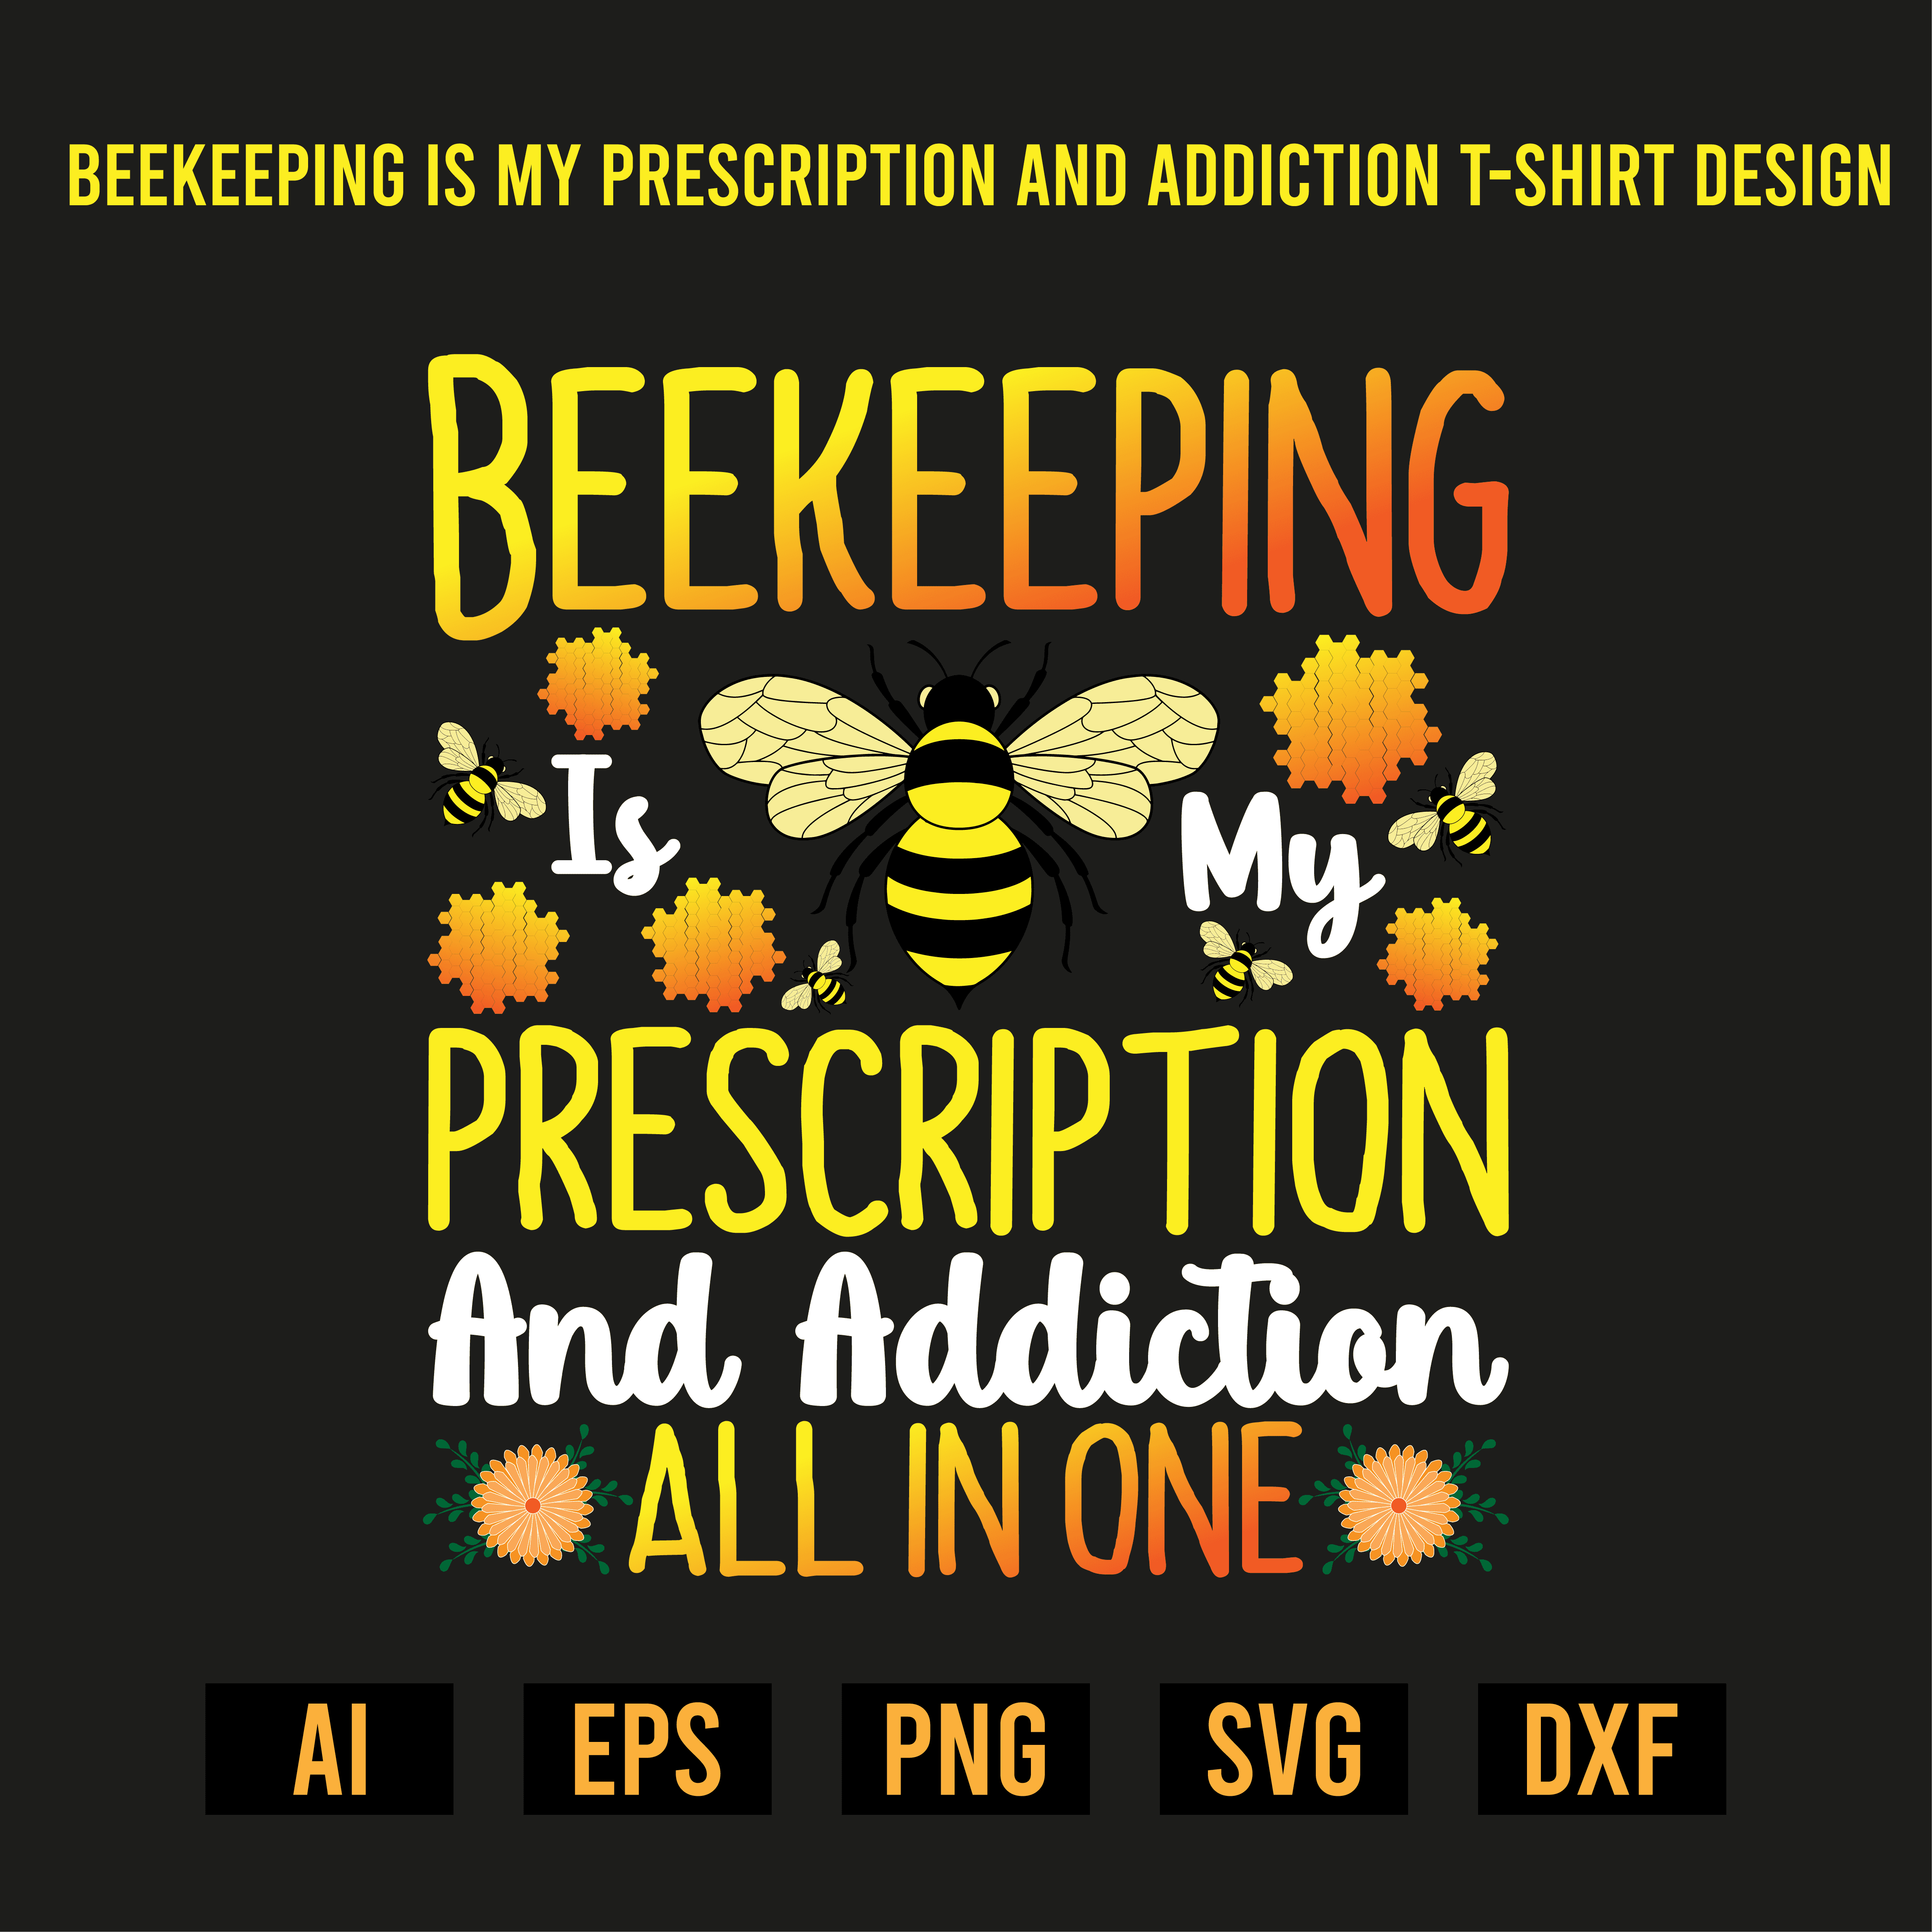 Beekeeping Is My Prescription And Addiction T- Shirt Design cover image.